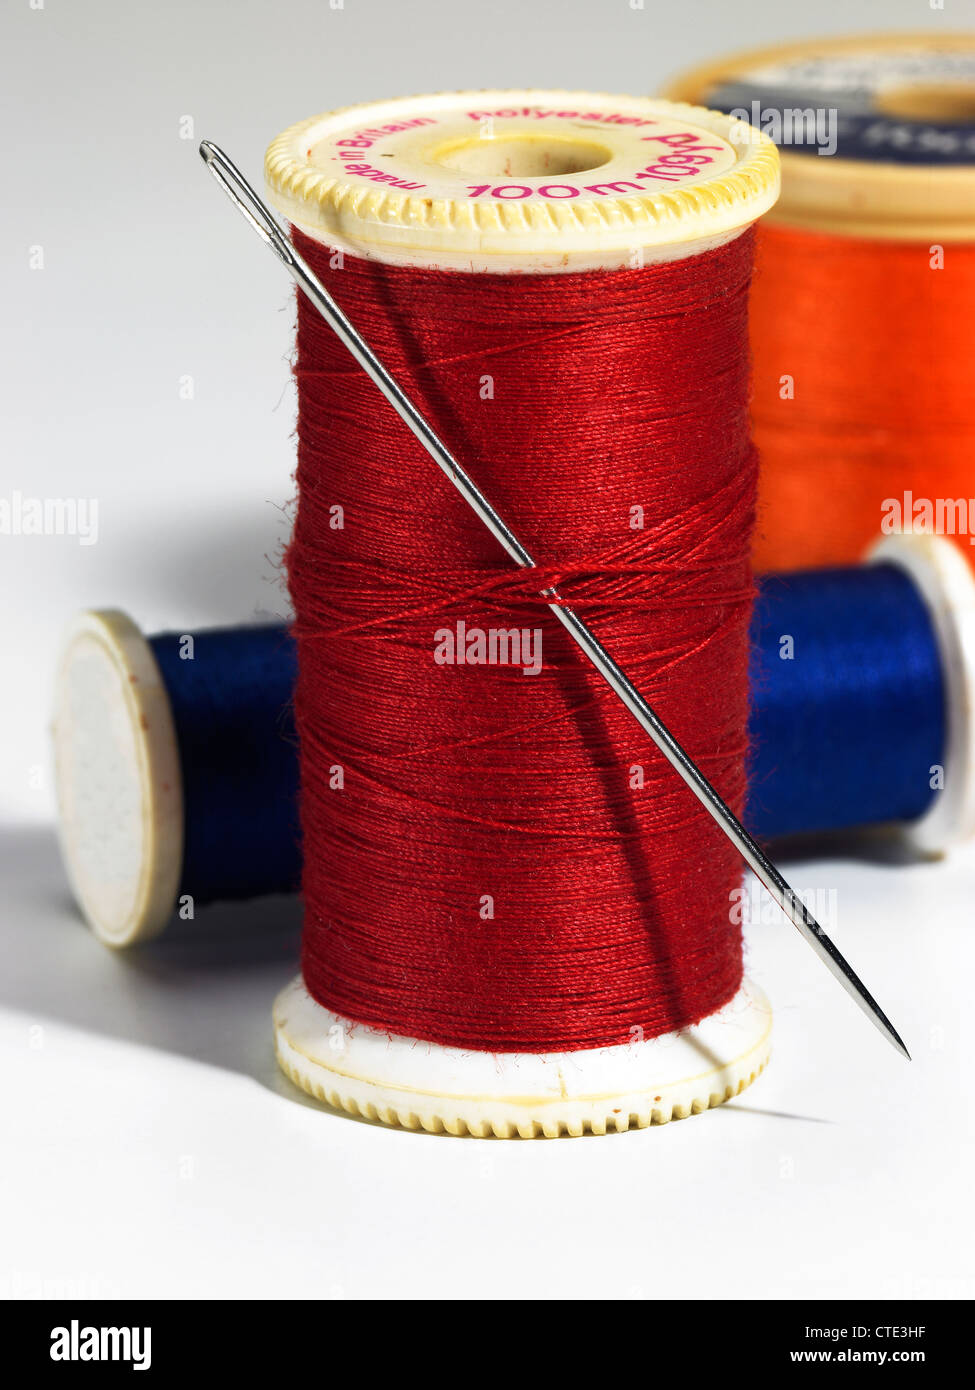 Reels of coloured cotton thread and a needle Stock Photo